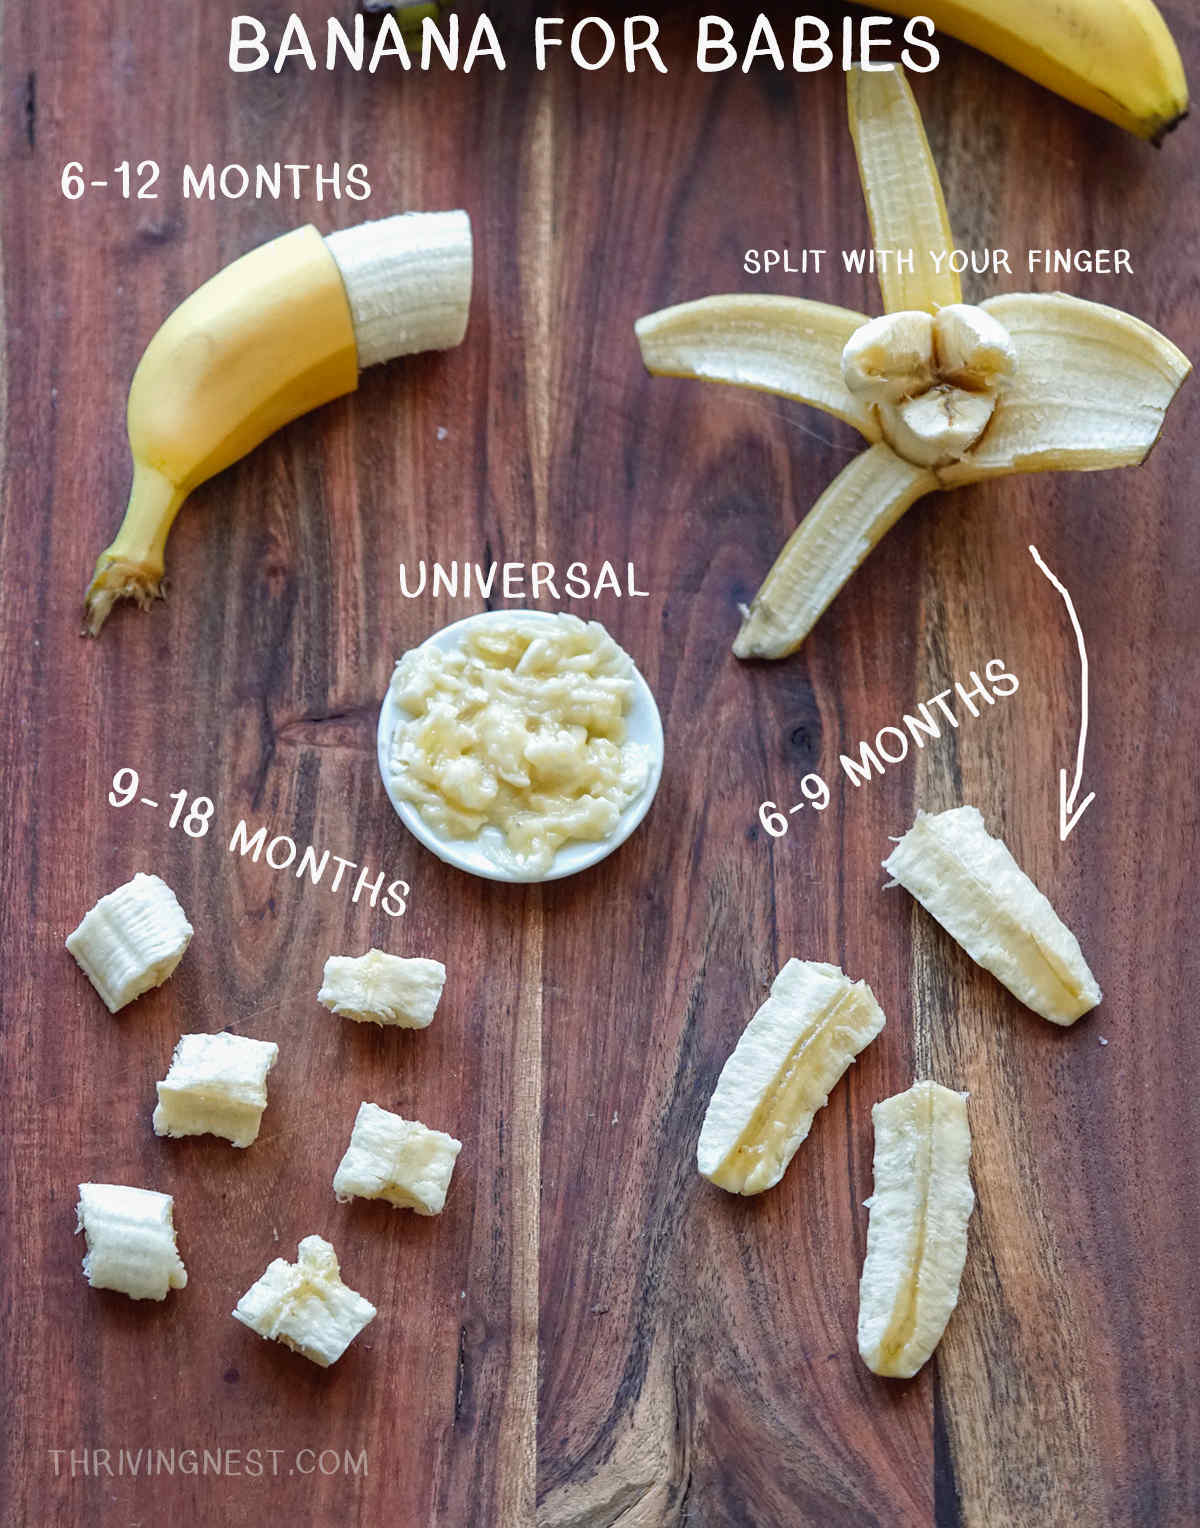 How to cut and serve banana for babies from 6 months and up. Banana for baby led weaning as first food. #babyledweaning